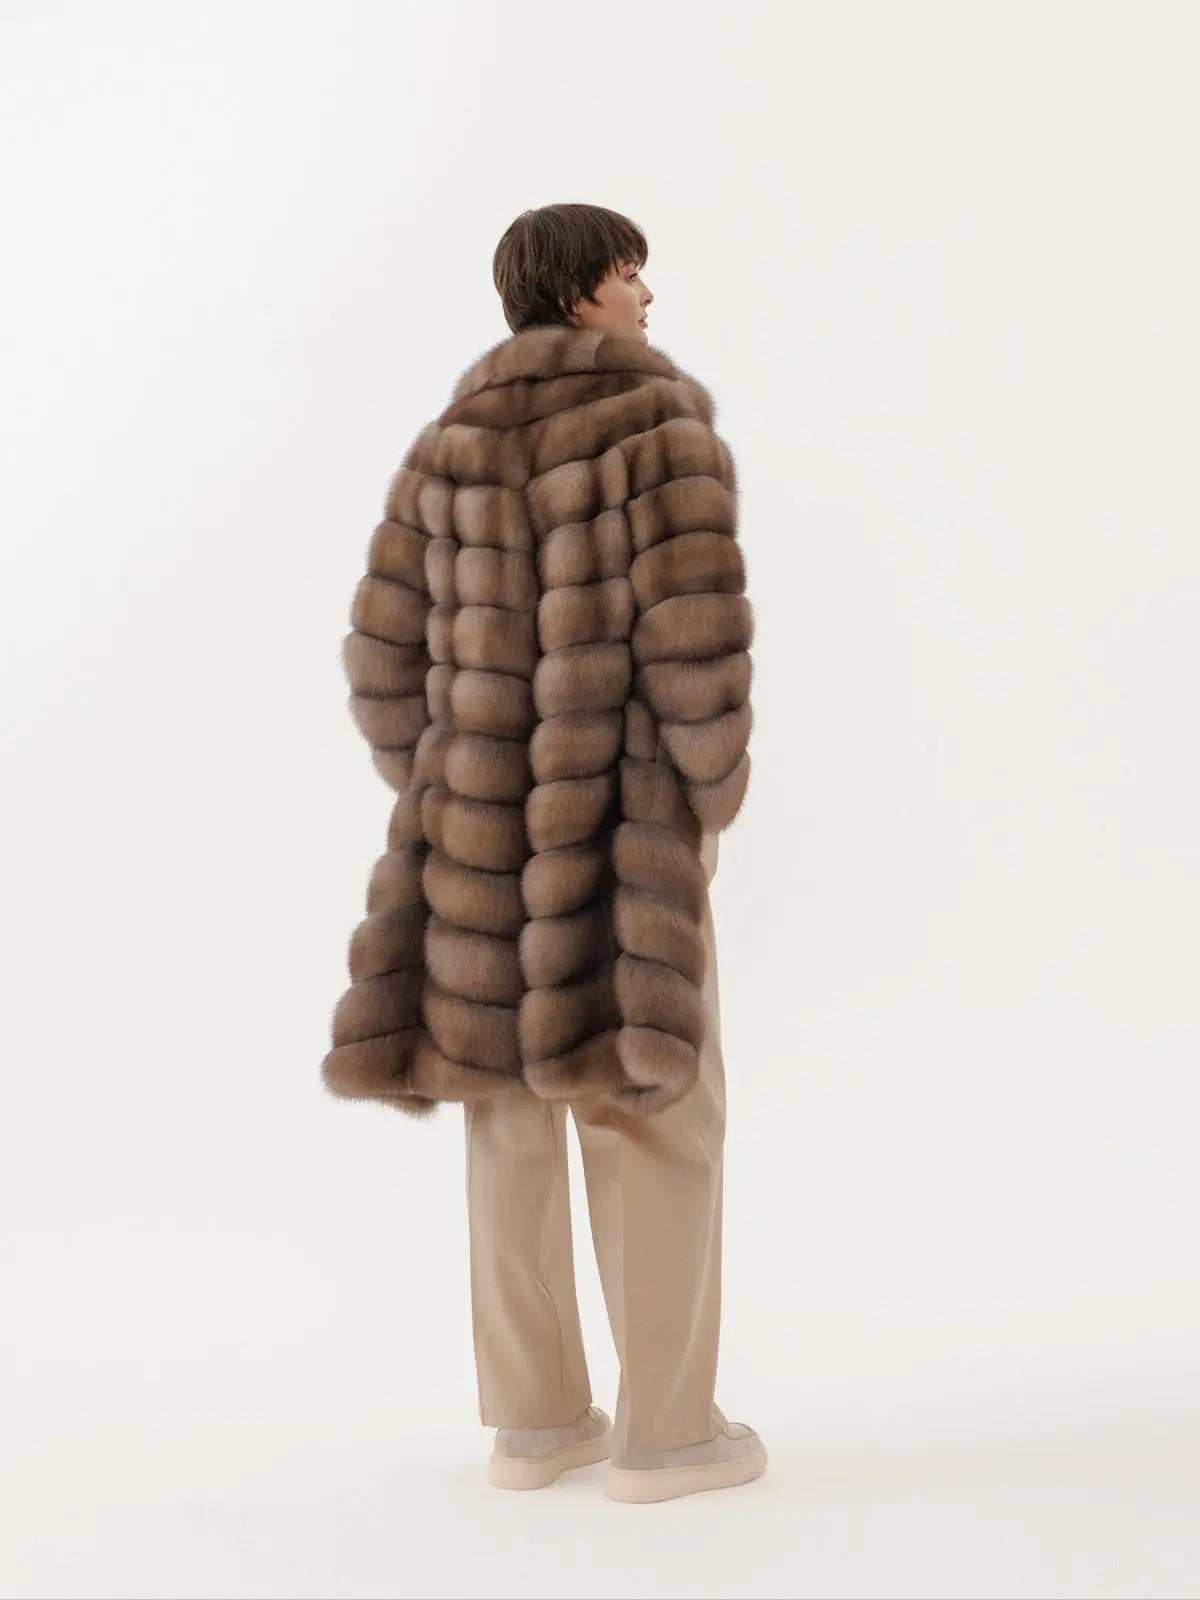 Marten coat with stand-up collar